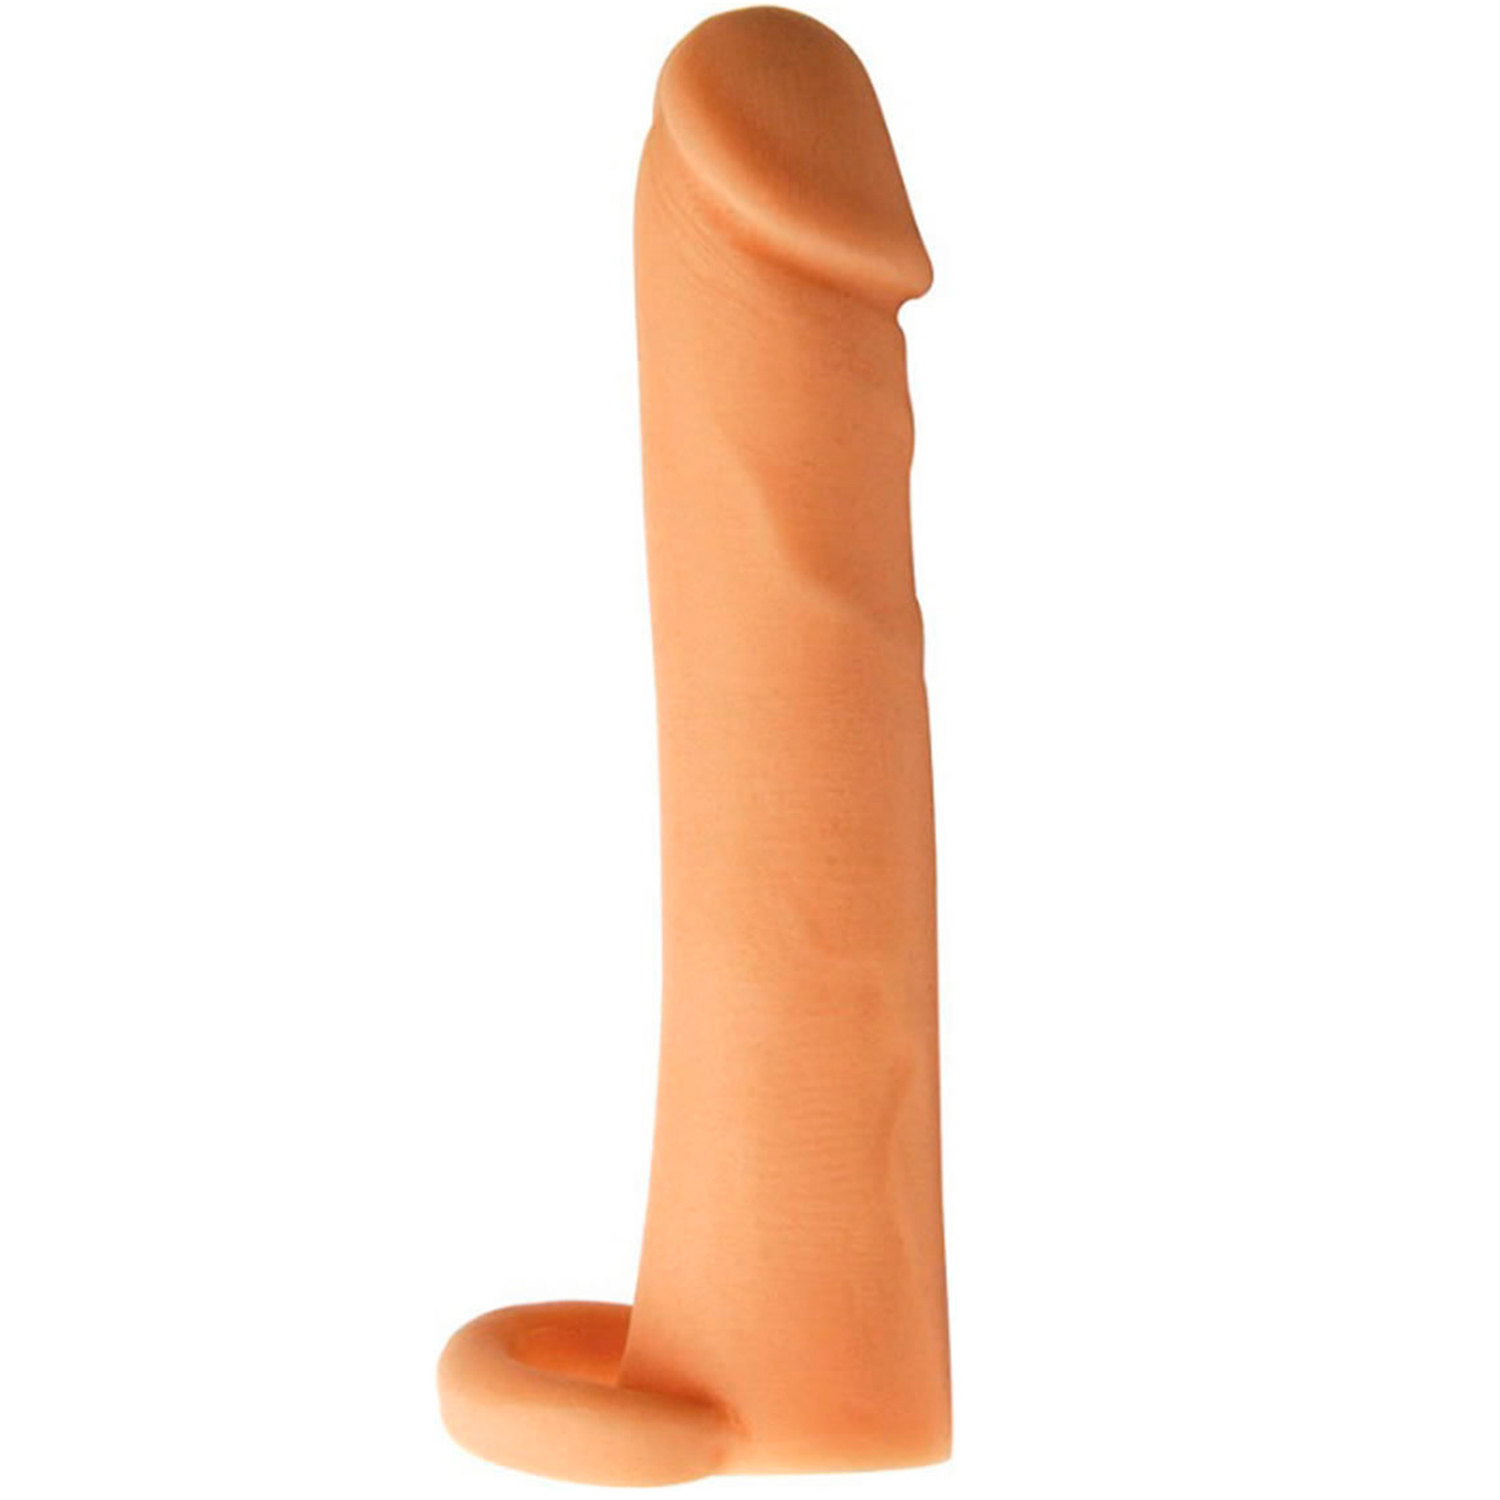 CyberSkin Cock Booster 5 cm Extra Penis Extension Sleeve - Topco Sales